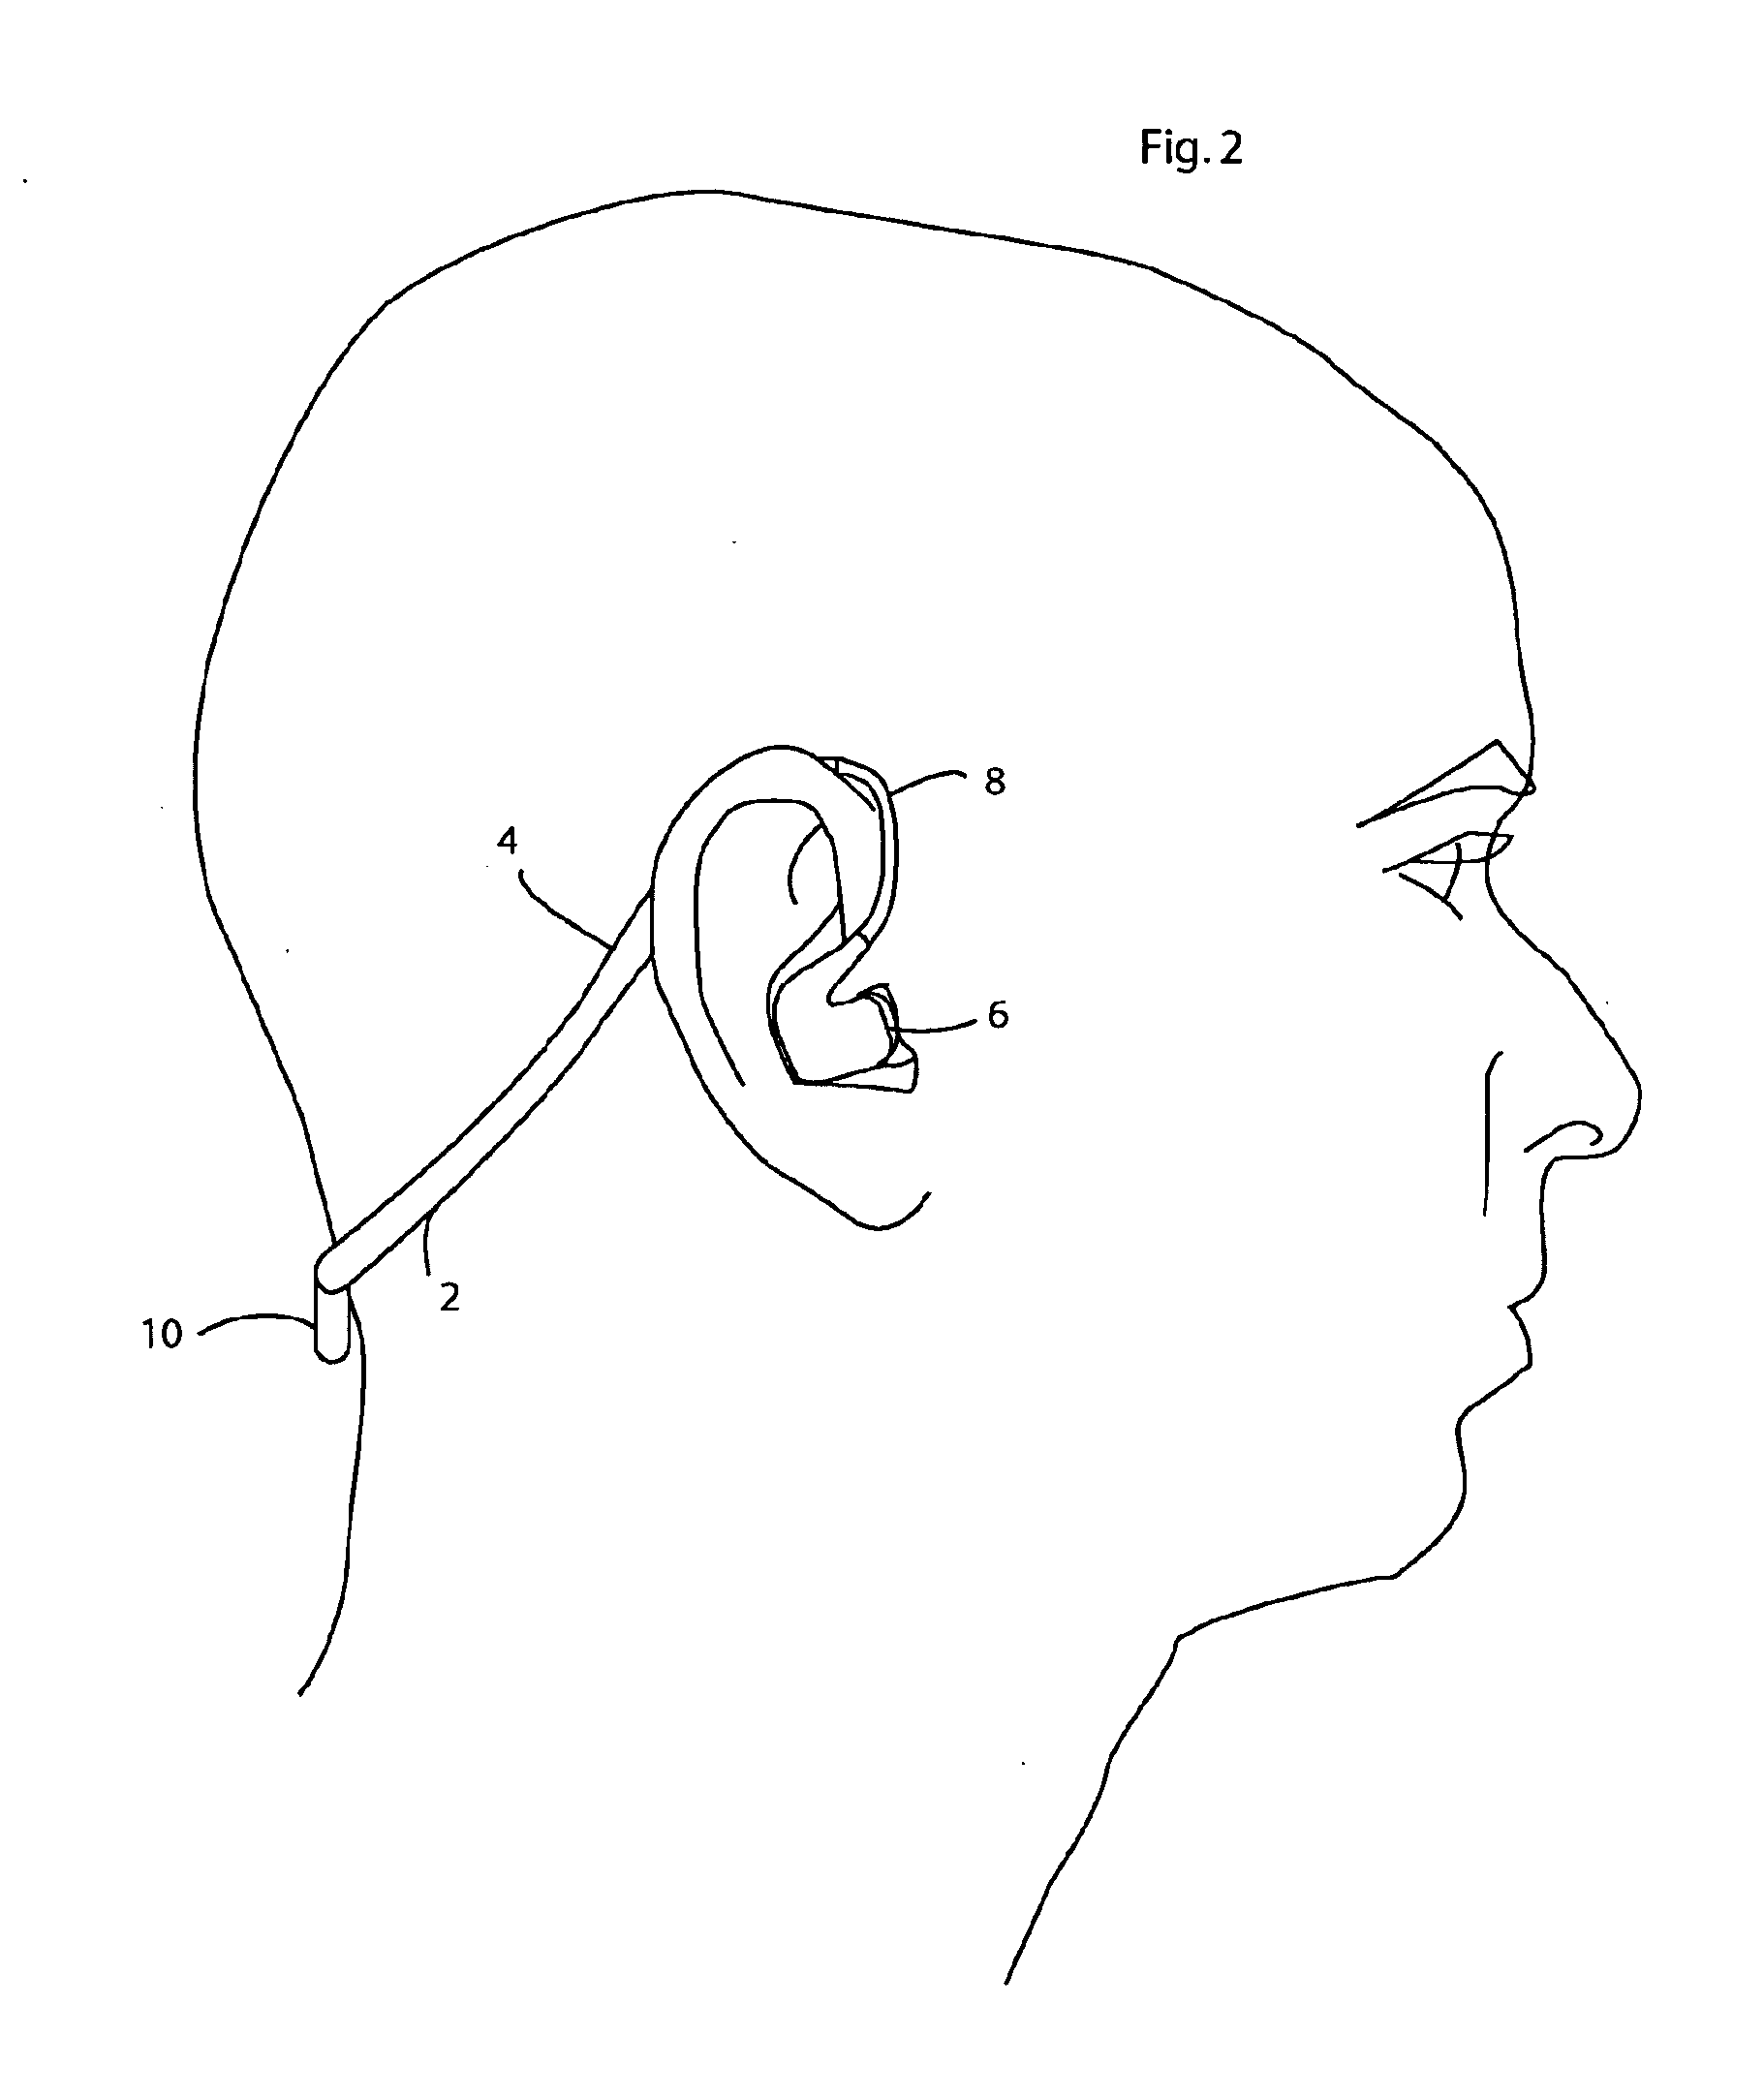 Audio headset and audio player